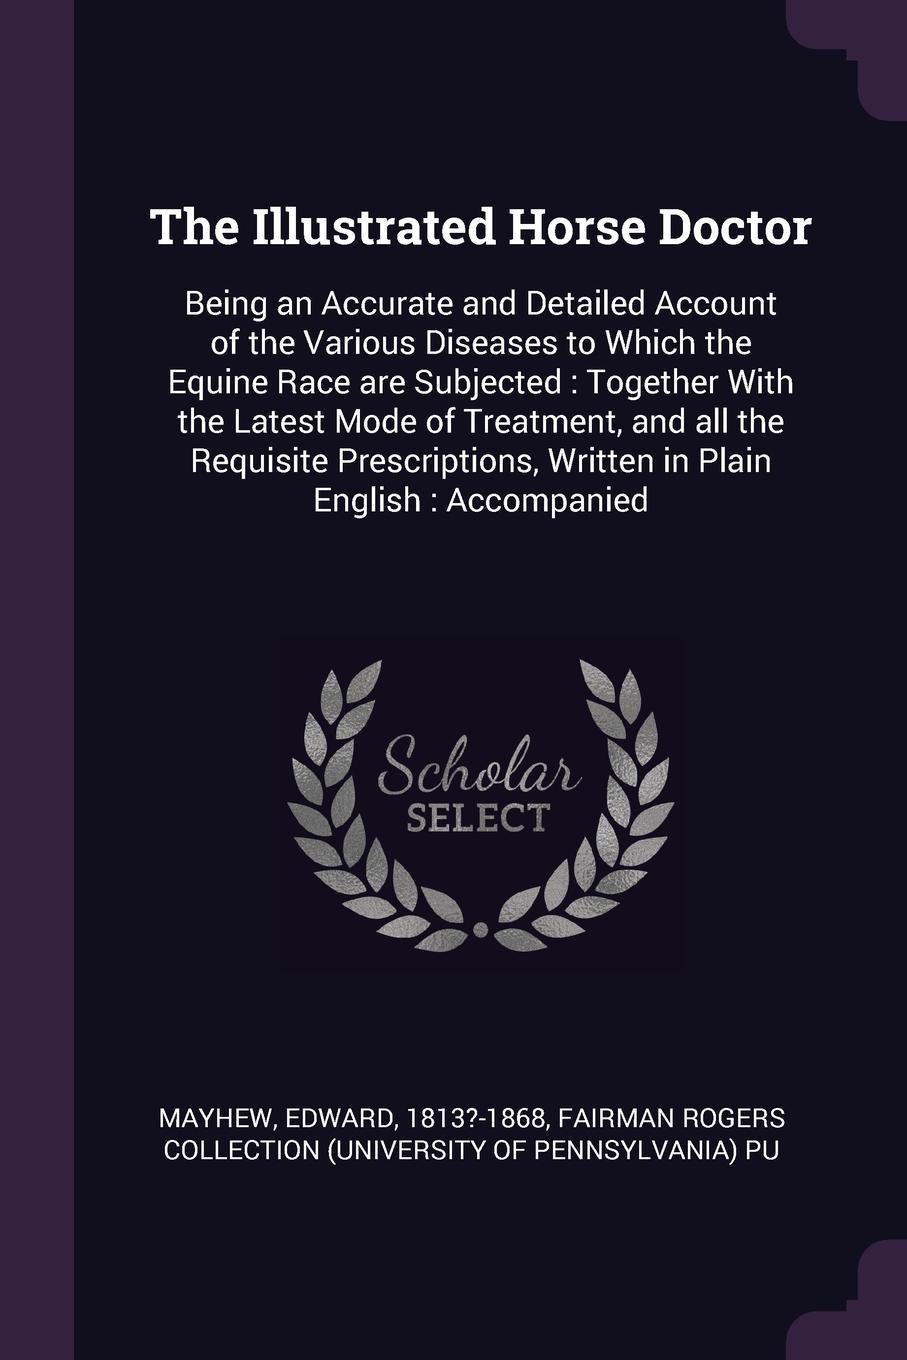 The Illustrated Horse Doctor. Being an Accurate and Detailed Account of the Various Diseases to Which the Equine Race are Subjected : Together With the Latest Mode of Treatment, and all the Requisite Prescriptions, Written in Plain English : Accom...